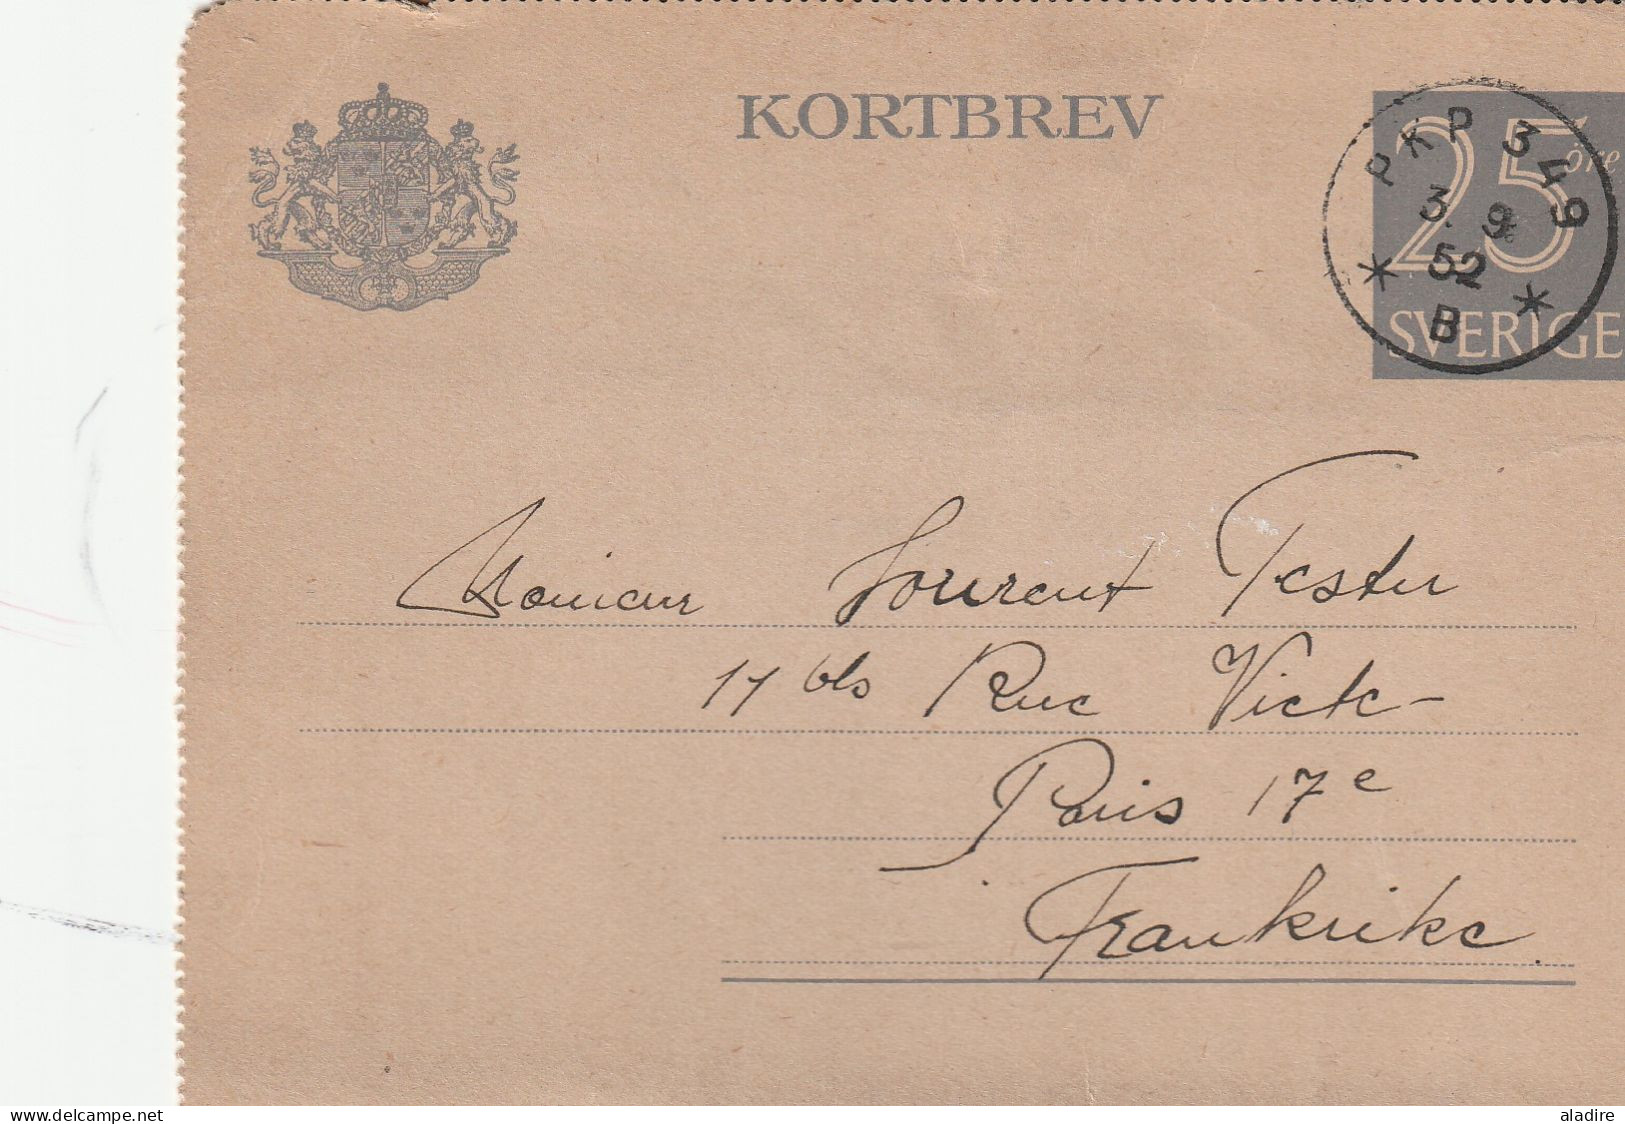 SVERIGE - SWEDEN - Collection of 7 old letters, covers &  card (1842-1952) - 14 scans - € 49 euros